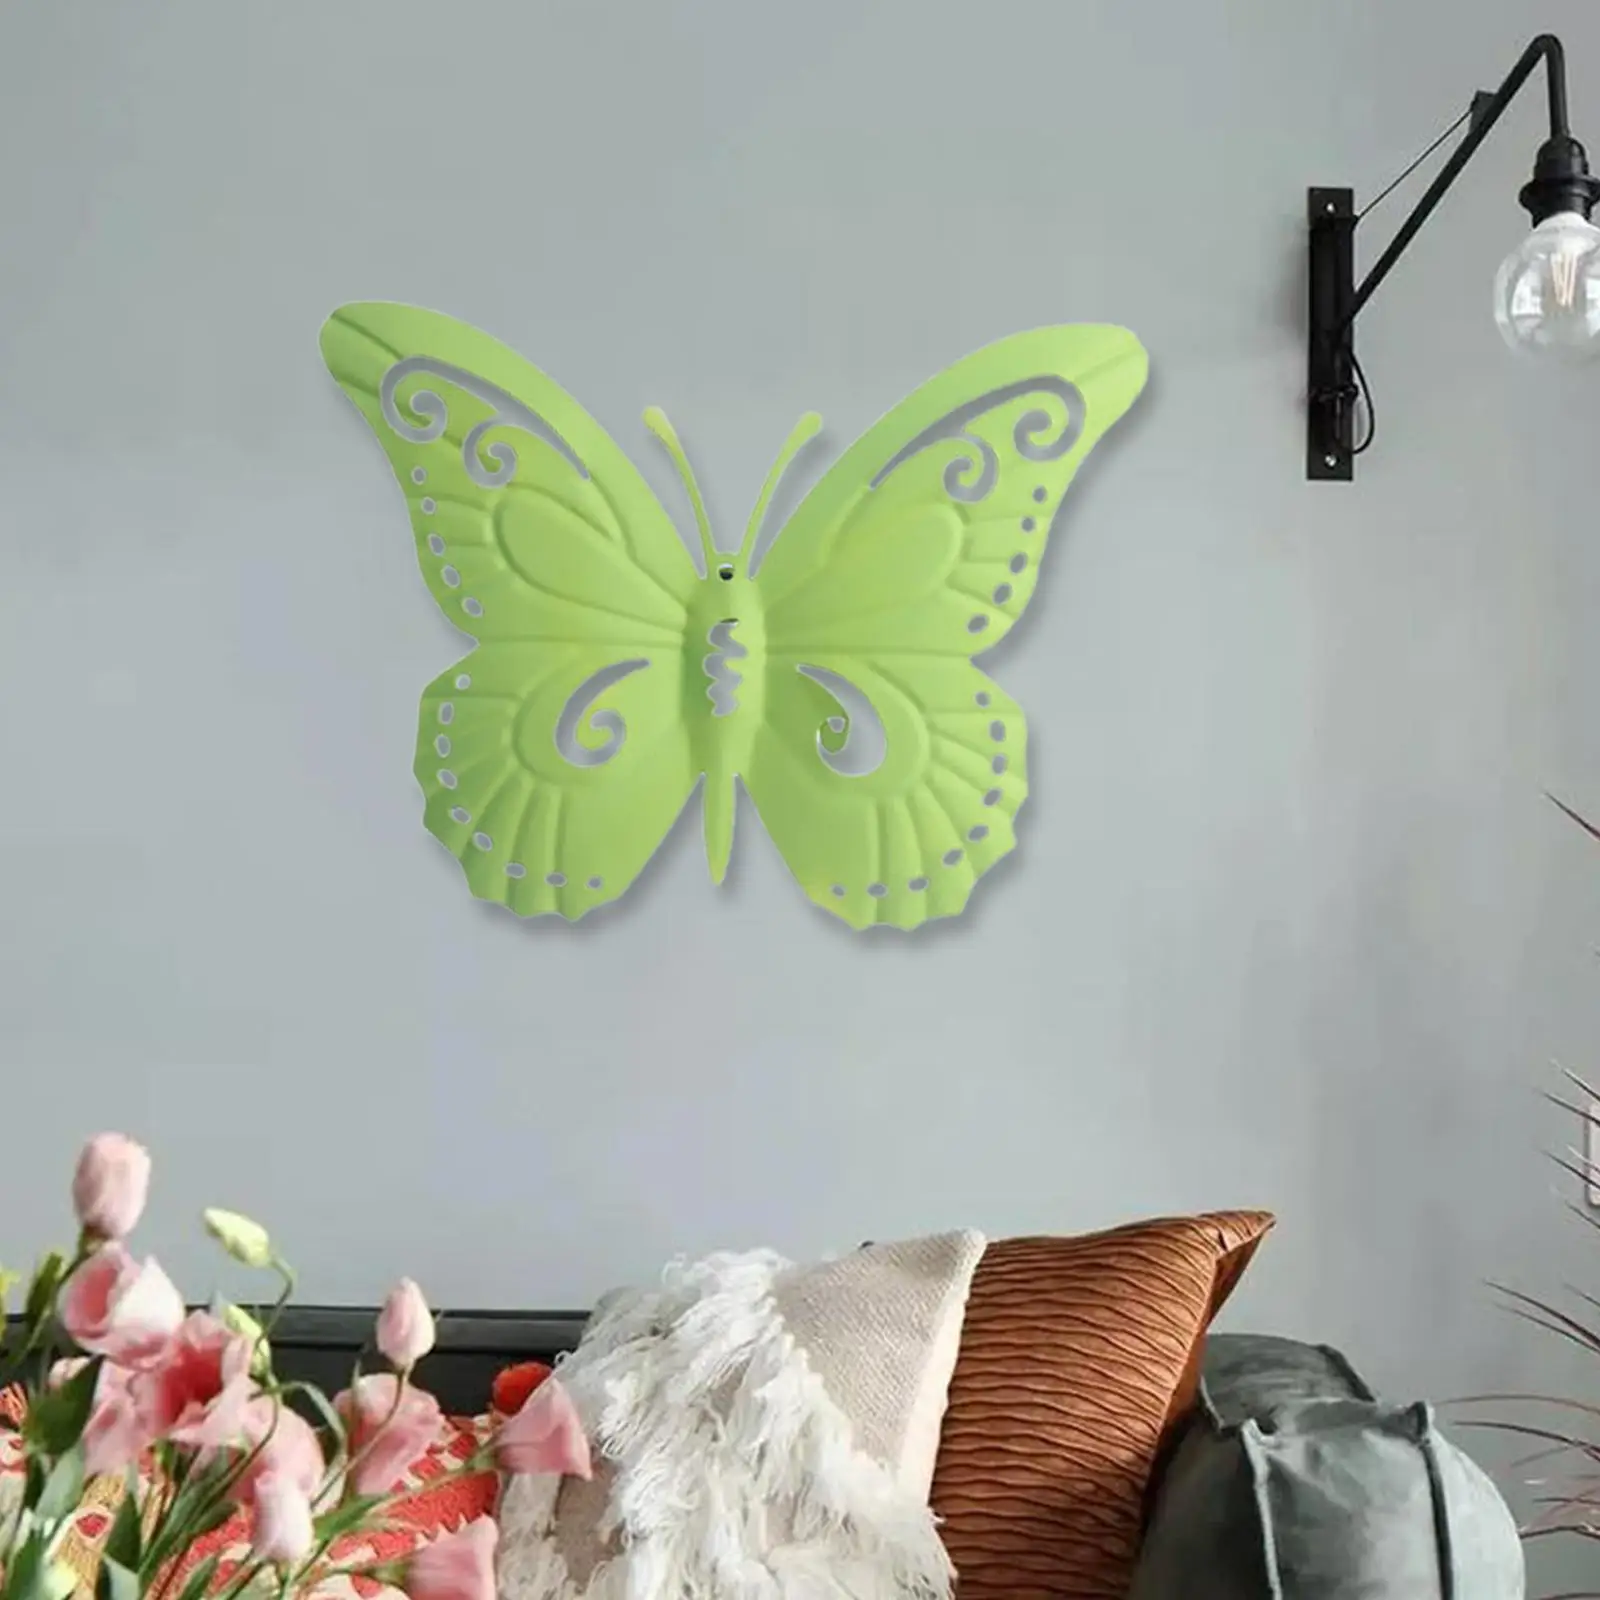 3D Butterfly Wall Decor Ornaments Decorative Sculpture Exquisite Metal for Outdoor Indoor living Room Yard Farmhouse